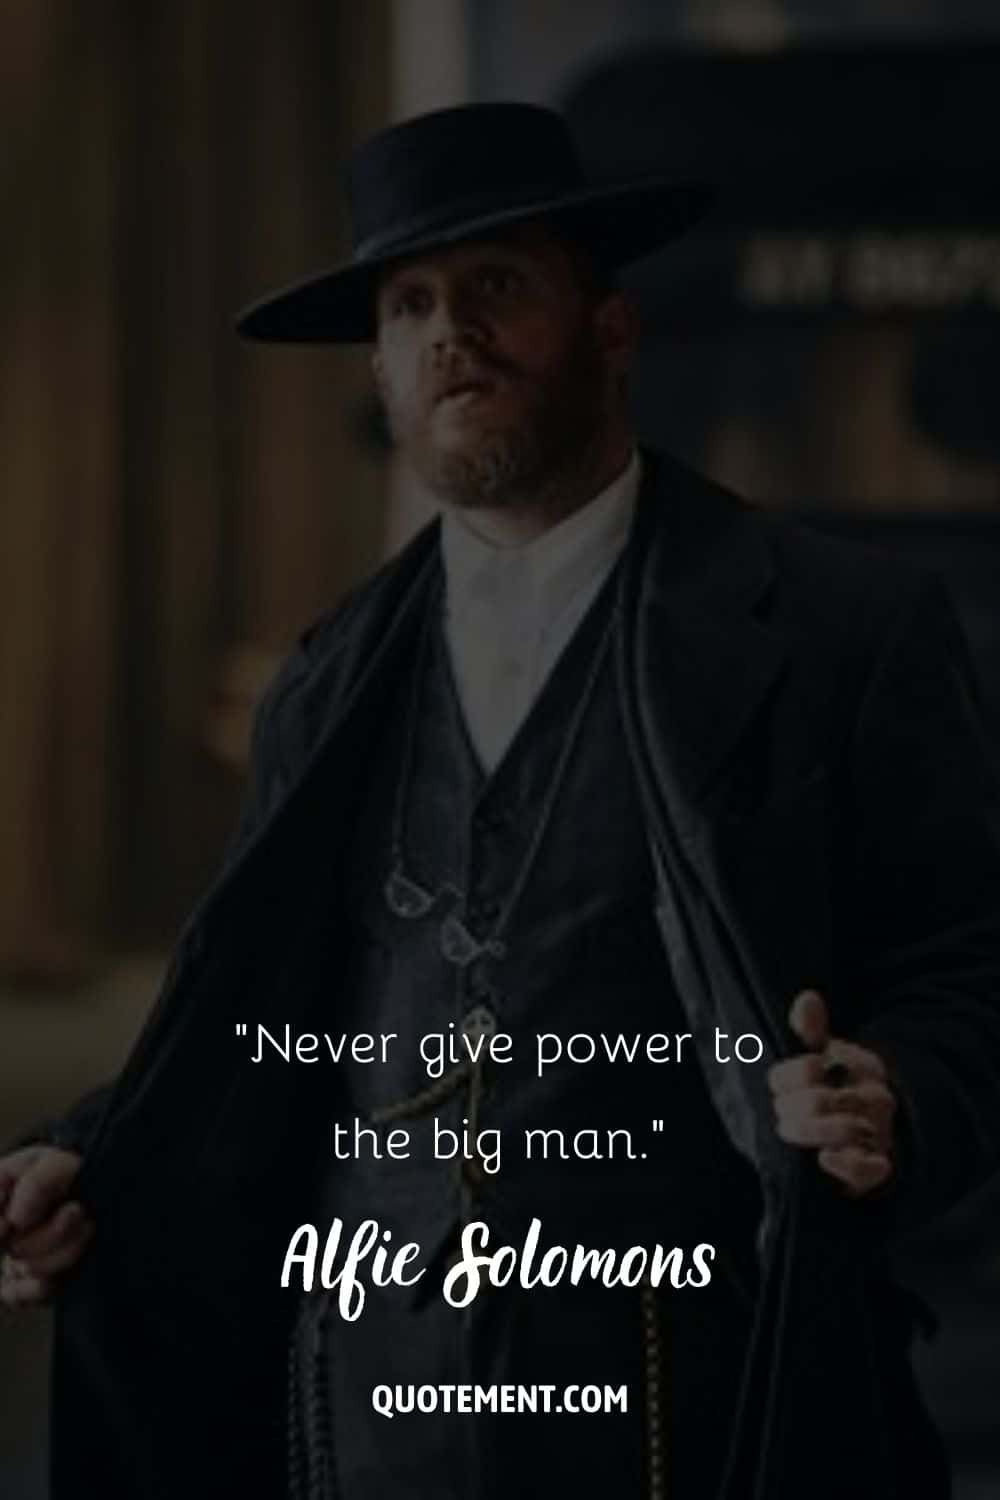 Tom Hardy in a suit representing alife solomons quote
